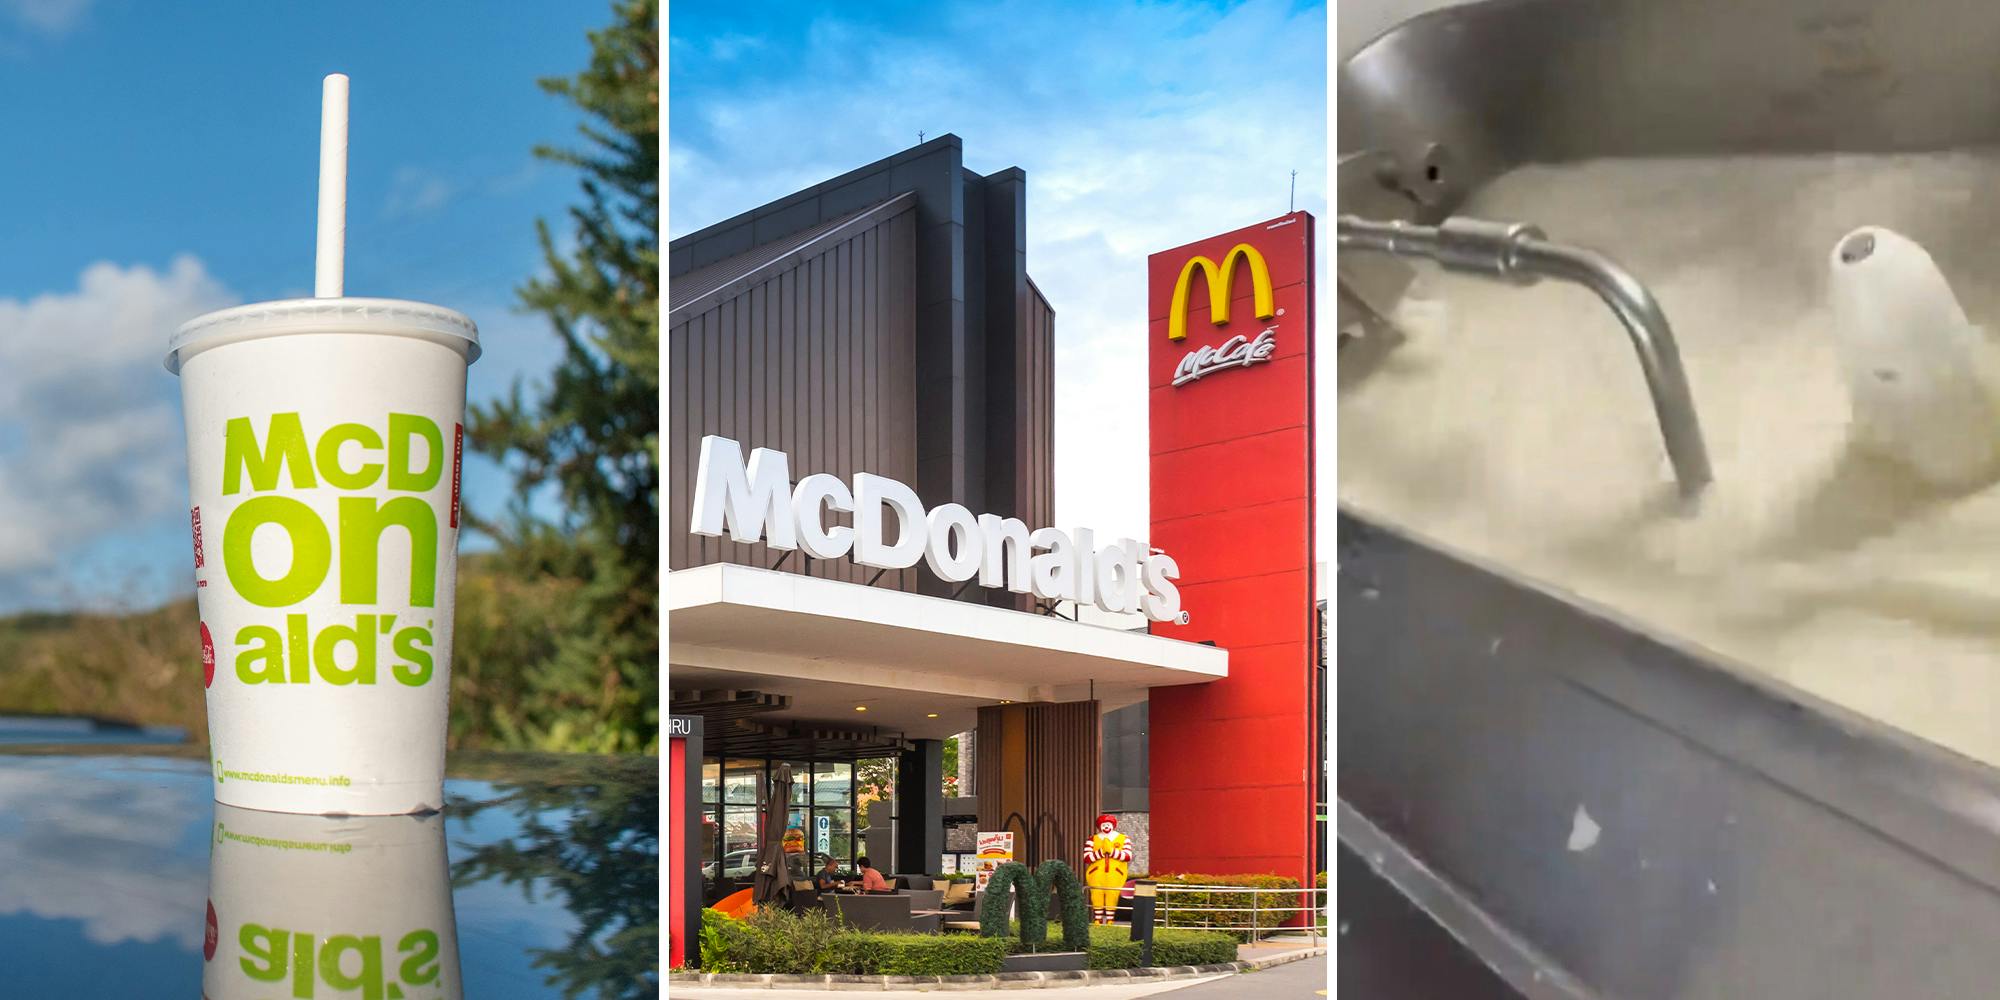 ‘This is actually insane!’: McDonald’s worker says they were forced to put expired milk into milkshake machine